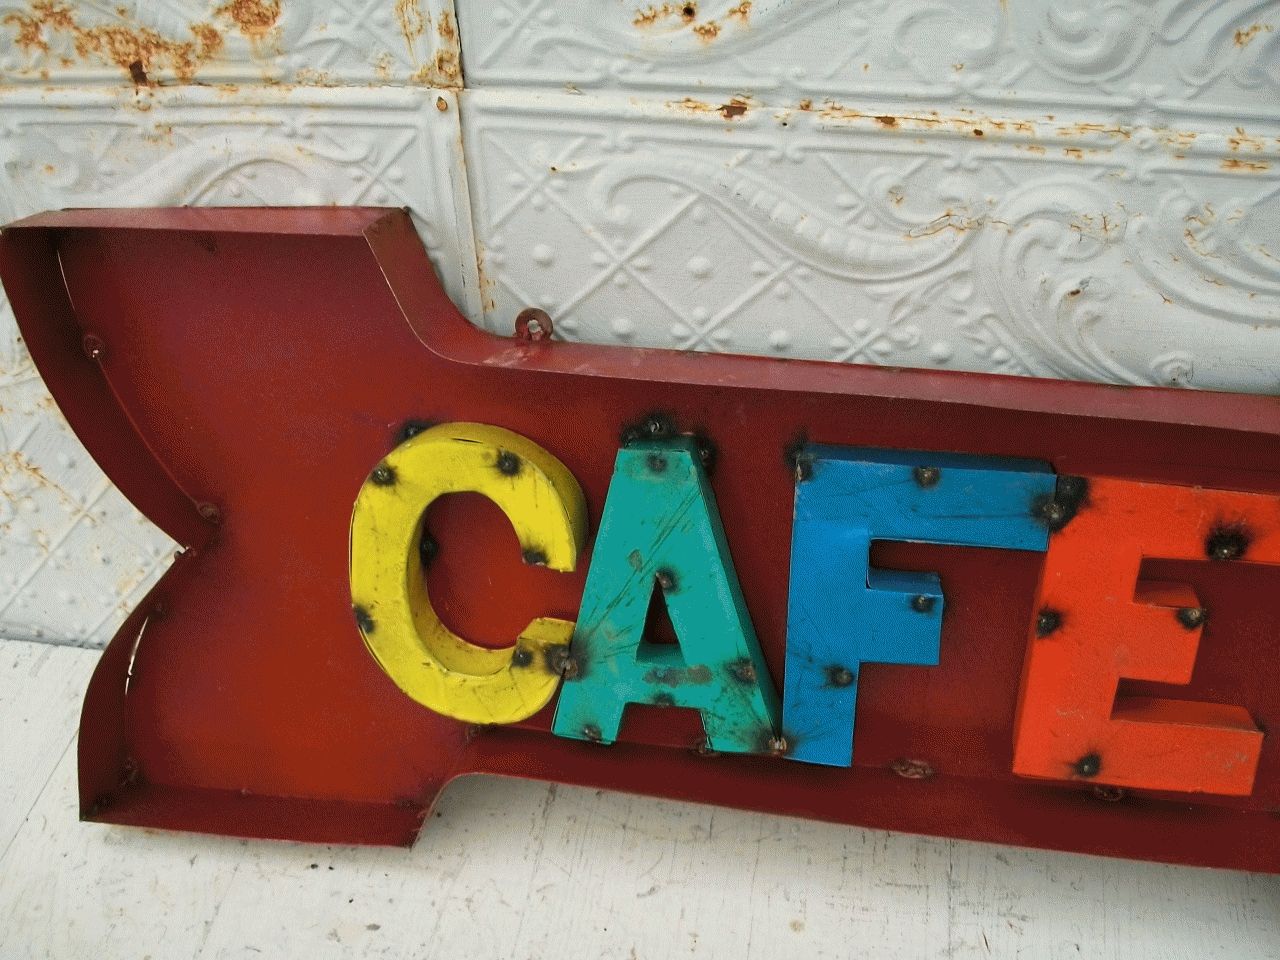 Rustic Metal 3d Cafe Sign Decorative Wall Art Intended For Current Cafe Metal Wall Art (View 12 of 20)